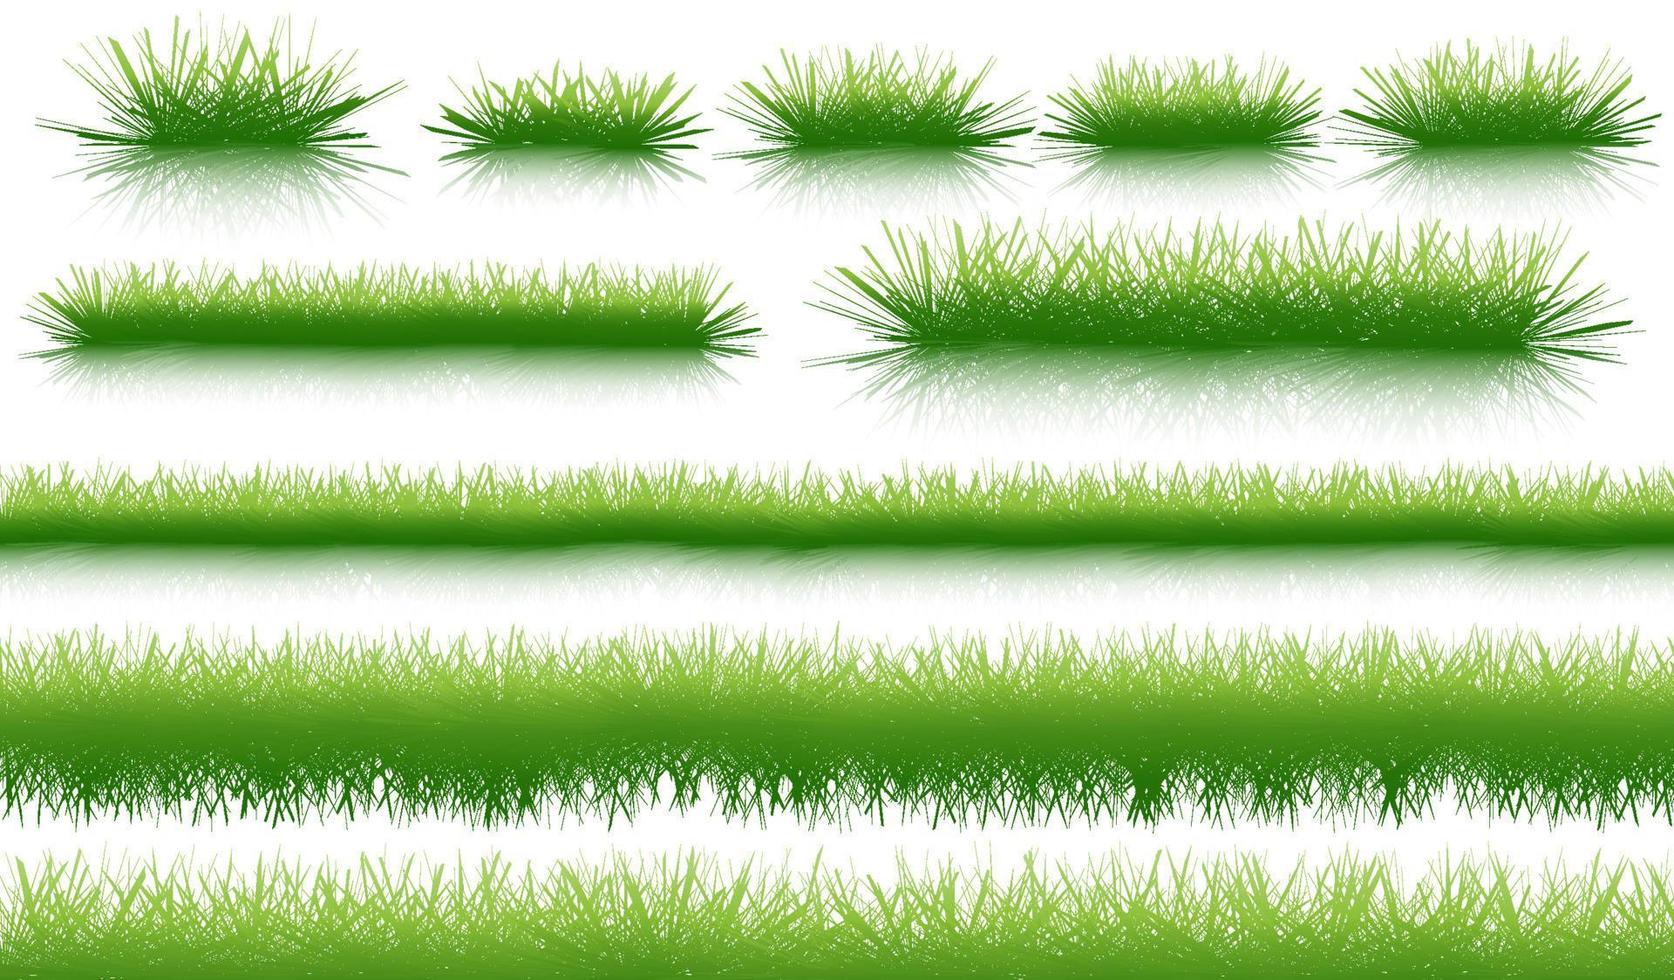 Green natural organic grass isolated on white background and texture vector